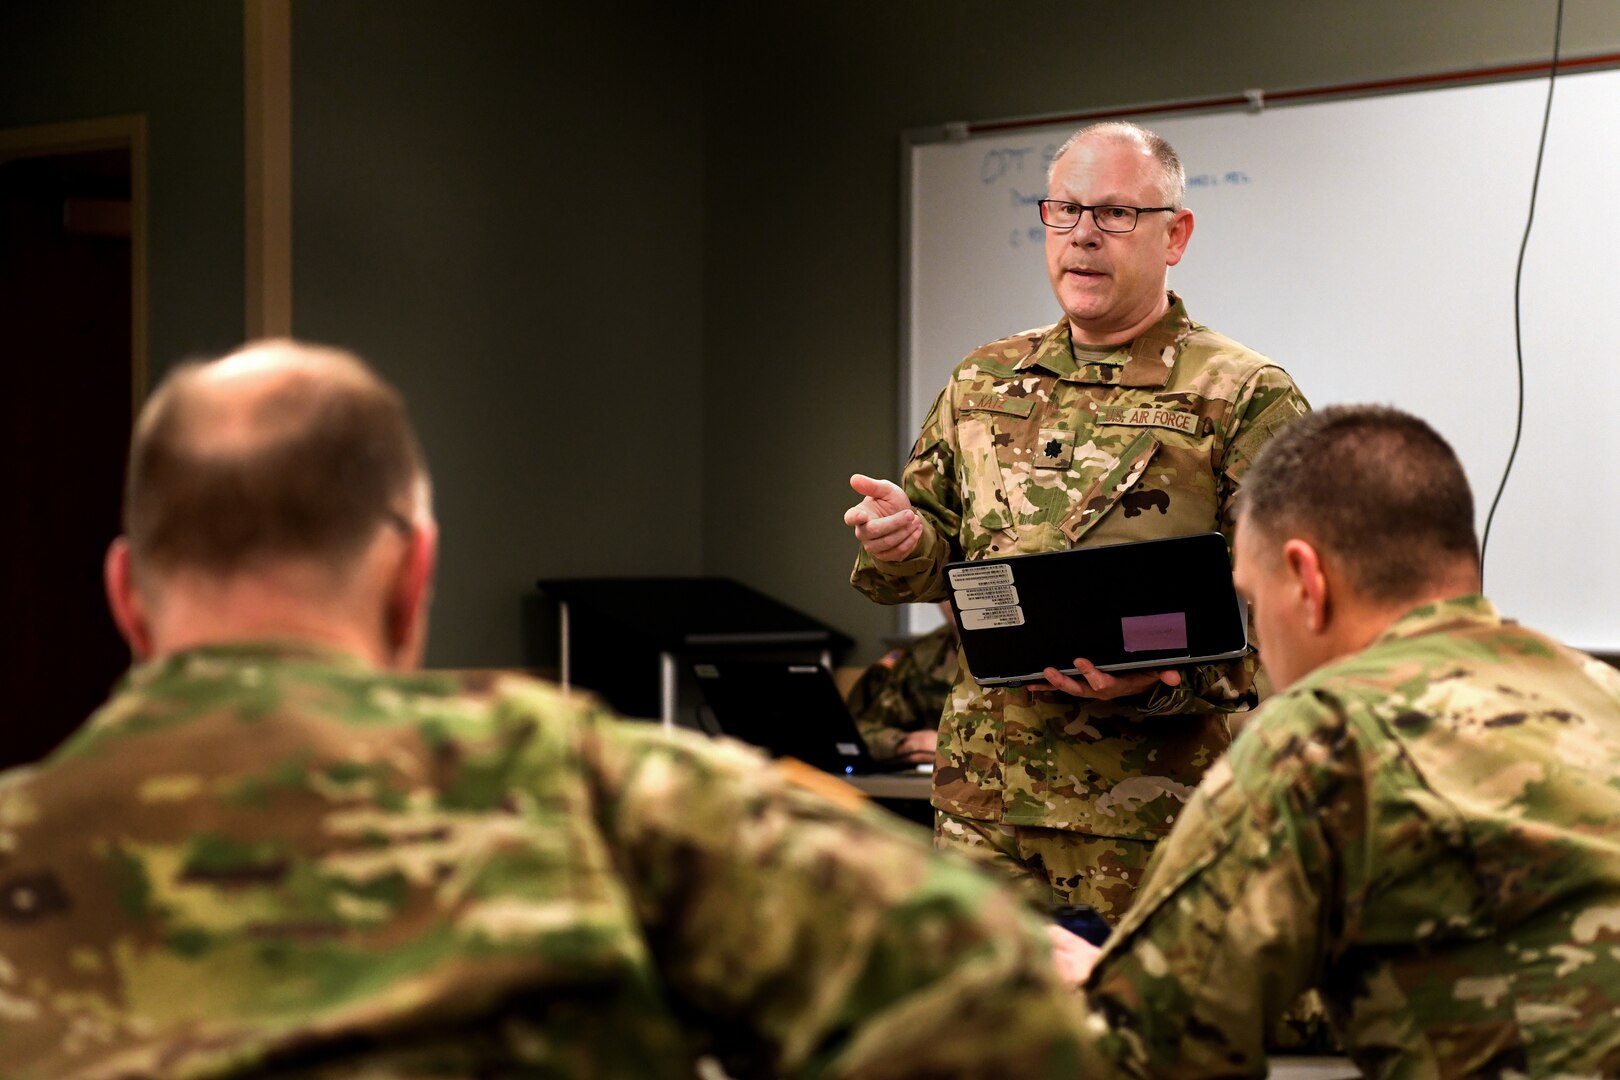 U.S. Air Force Lt. Col. Gary Katz, a flight surgeon assigned to the 178th Wing serving on Joint Task Force-37, briefs commanders March 23, 2020, at the Defense Supply Center in Columbus, Ohio. Katz is one of more than 400 members of the Ohio National Guard supporting food distribution at 12 locations across Ohio serving more than 11 million Ohioans in all 88 counties.